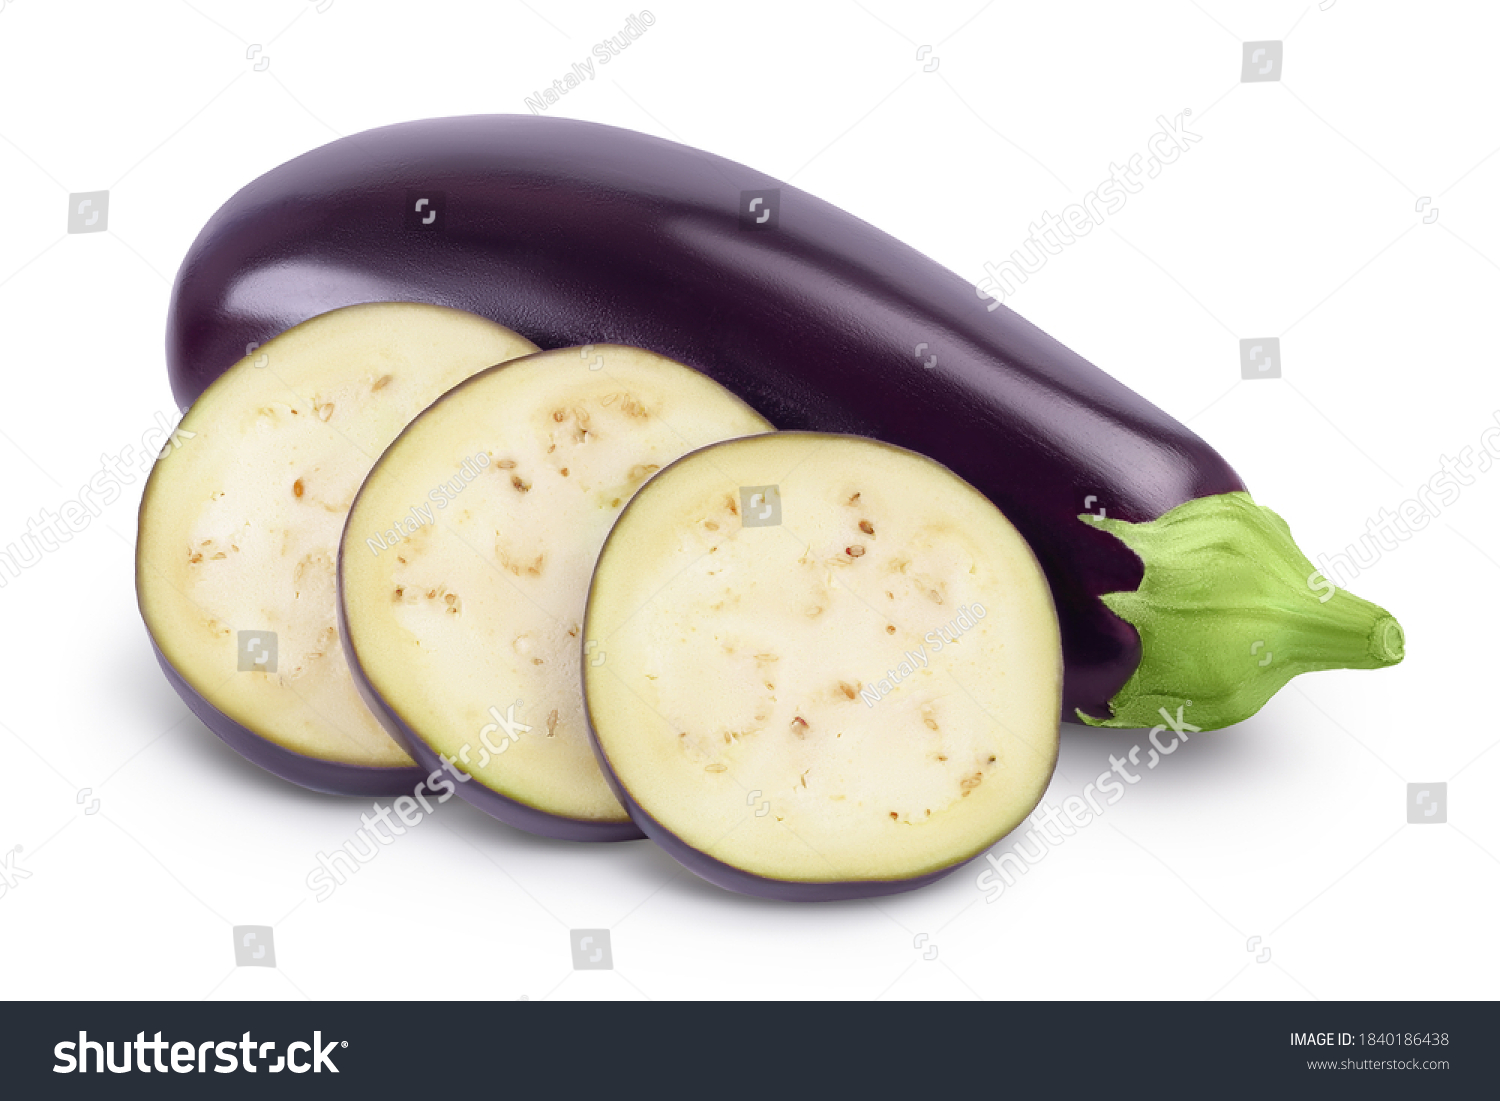 Eggplant or aubergine isolated on white background with clipping path and full depth of field #1840186438